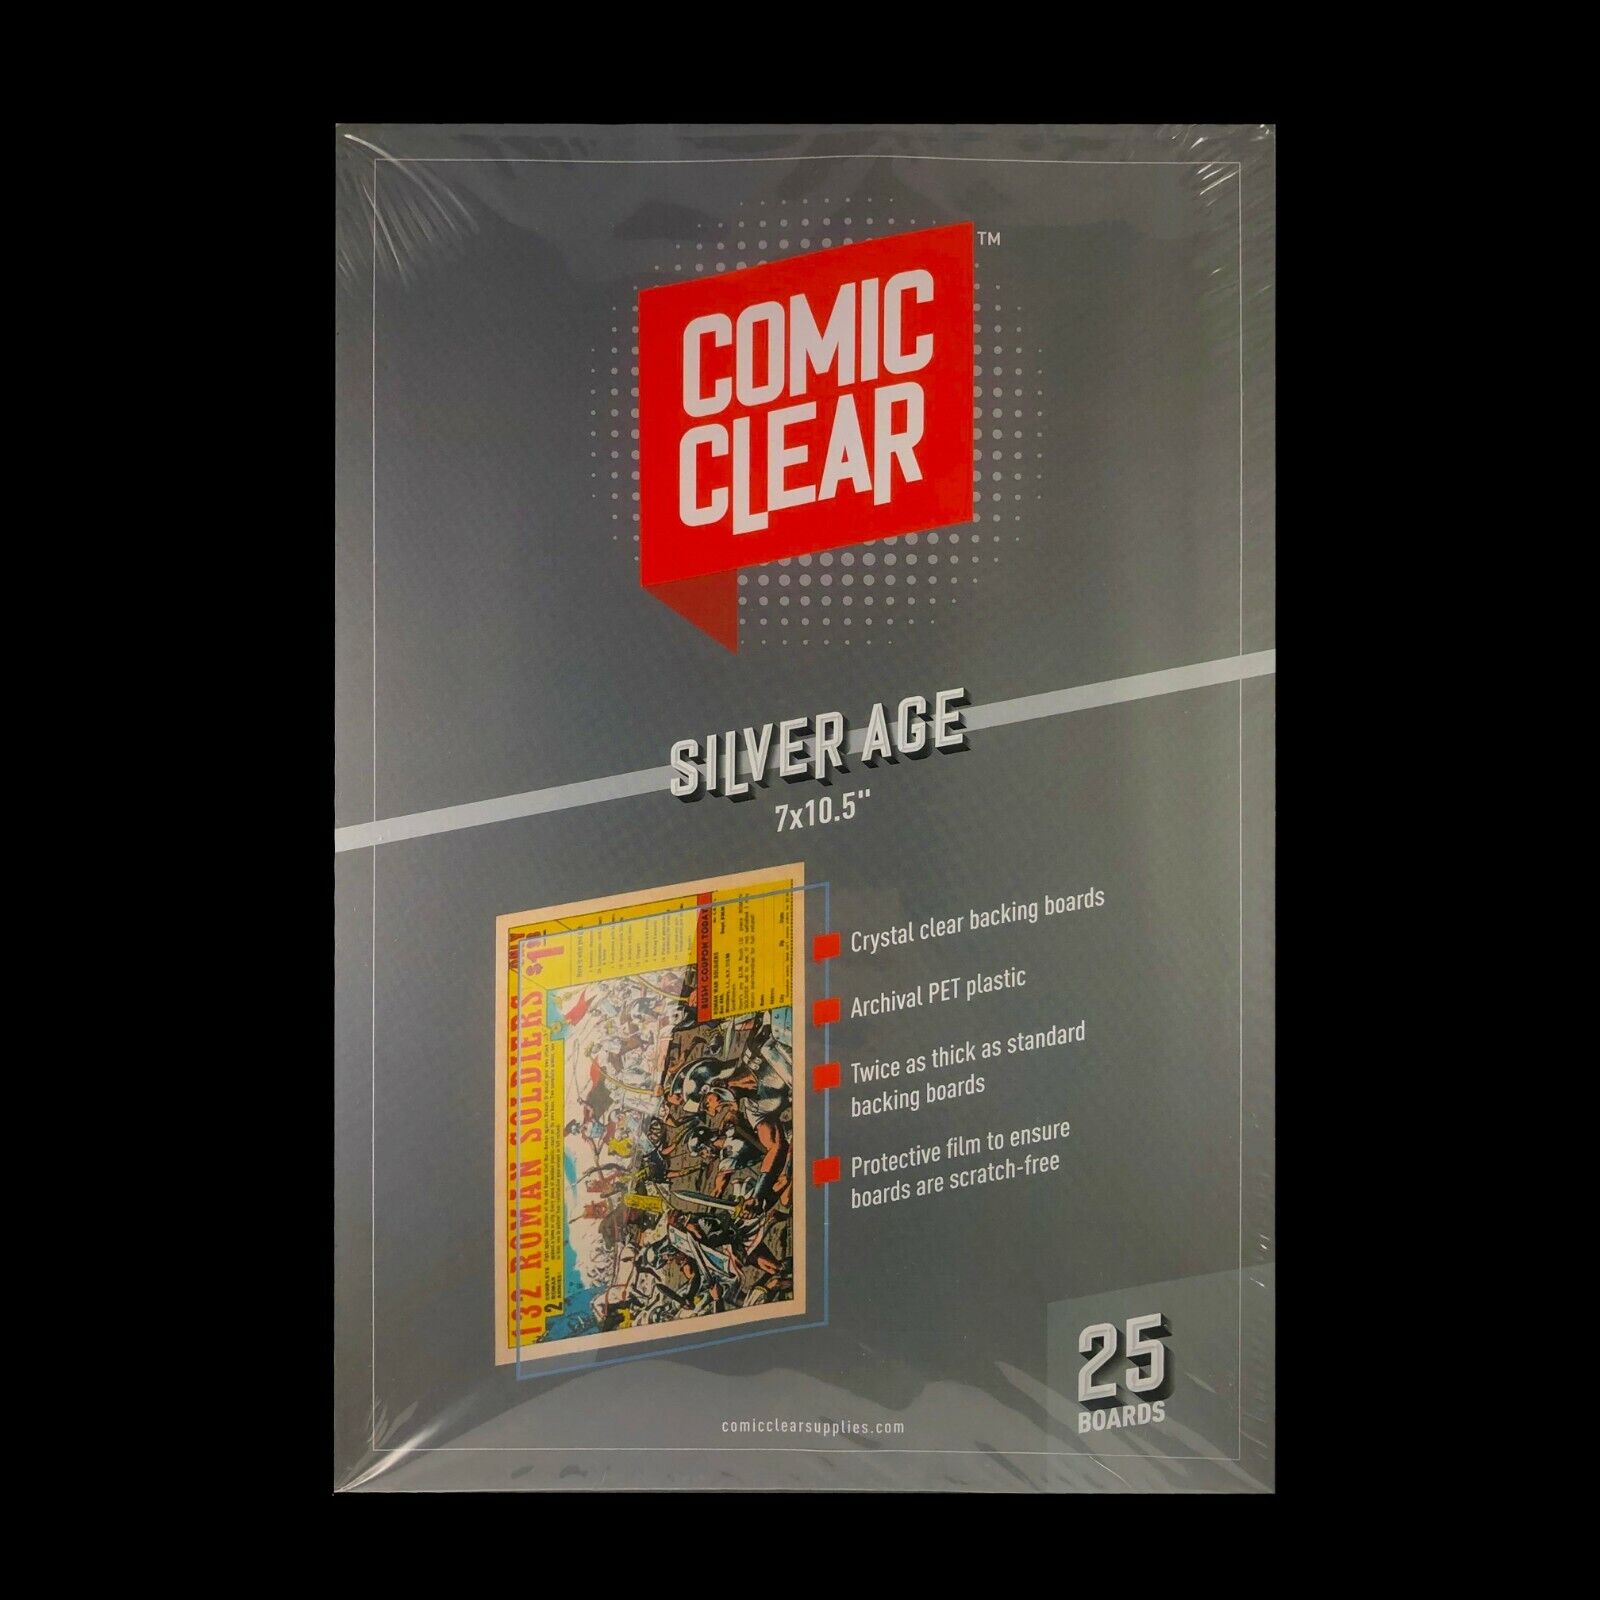 25-pack of Crystal-Clear Comic Clear Backing Boards - Silver Age Size